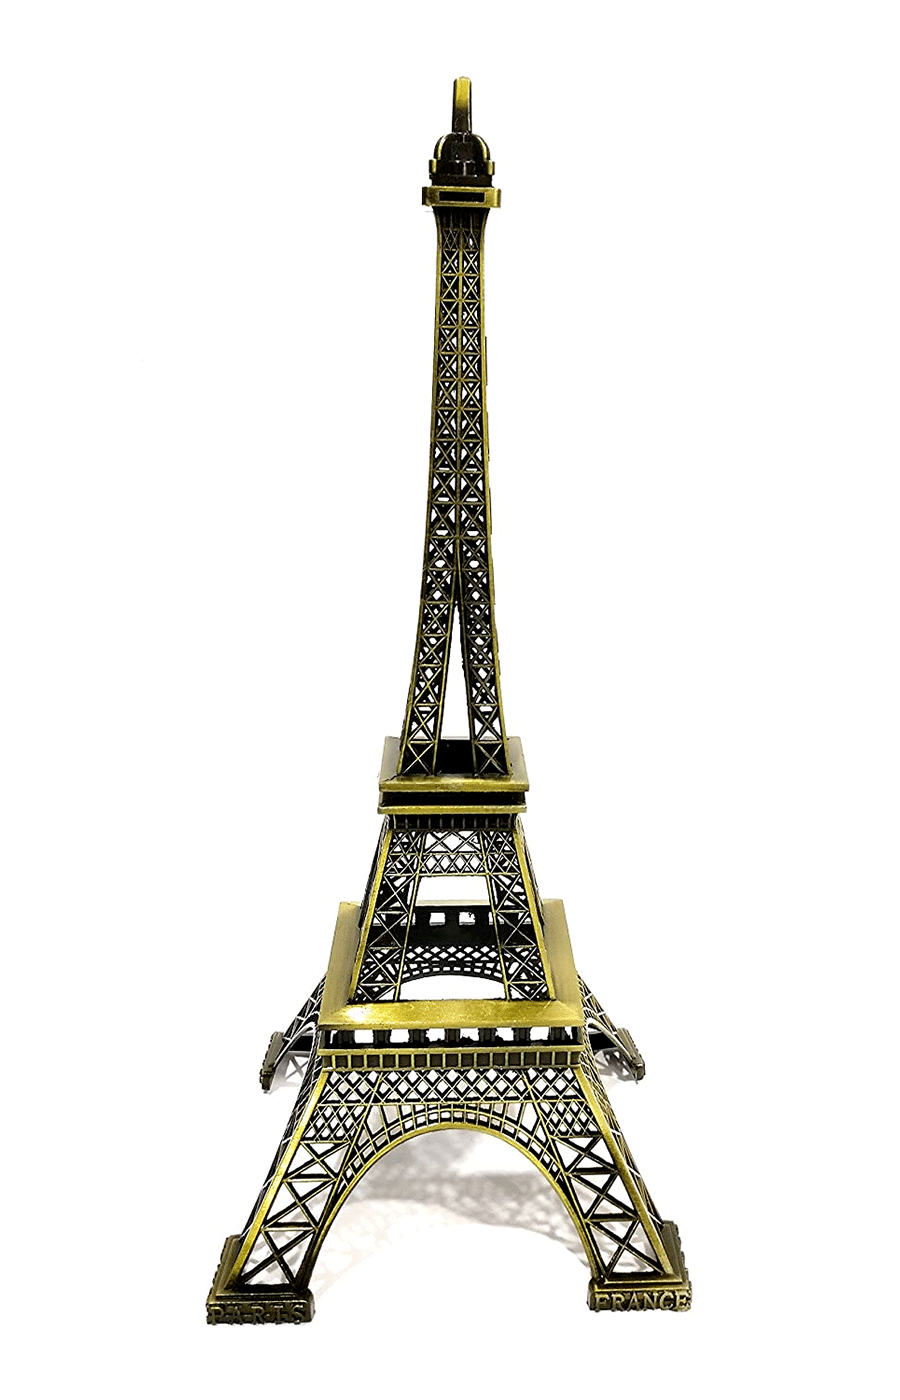 FunkyTradition 18 cm Tall Eiffel Tower Statue Metal Showpiece | Birthday Anniversary Gift and Home Office Decor 7" Tall